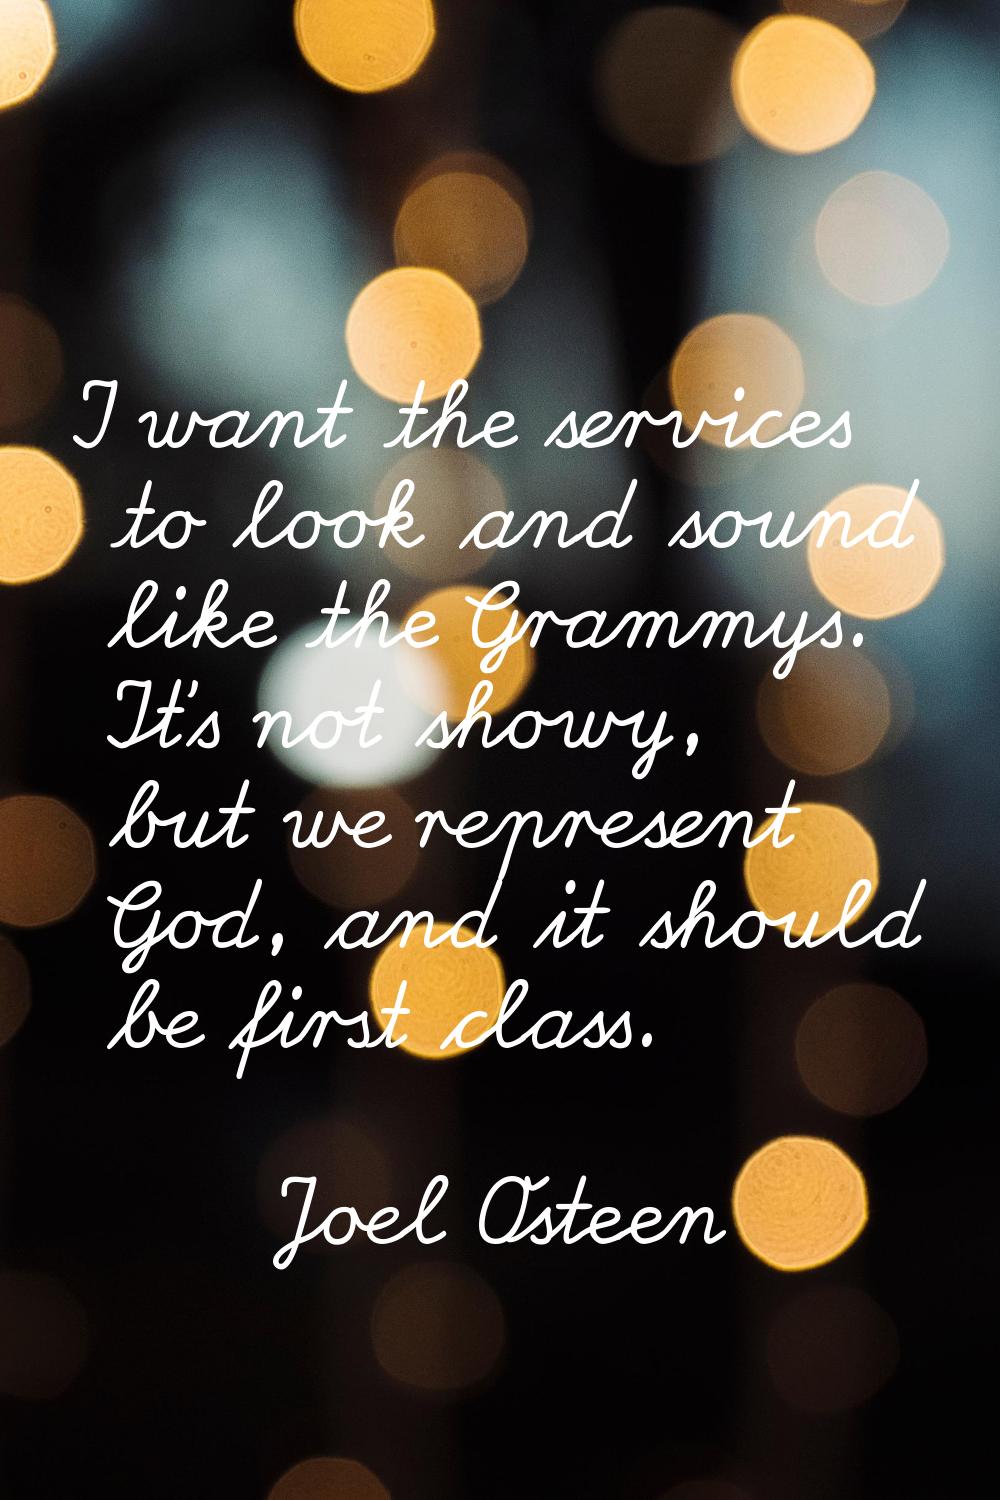 I want the services to look and sound like the Grammys. It's not showy, but we represent God, and i